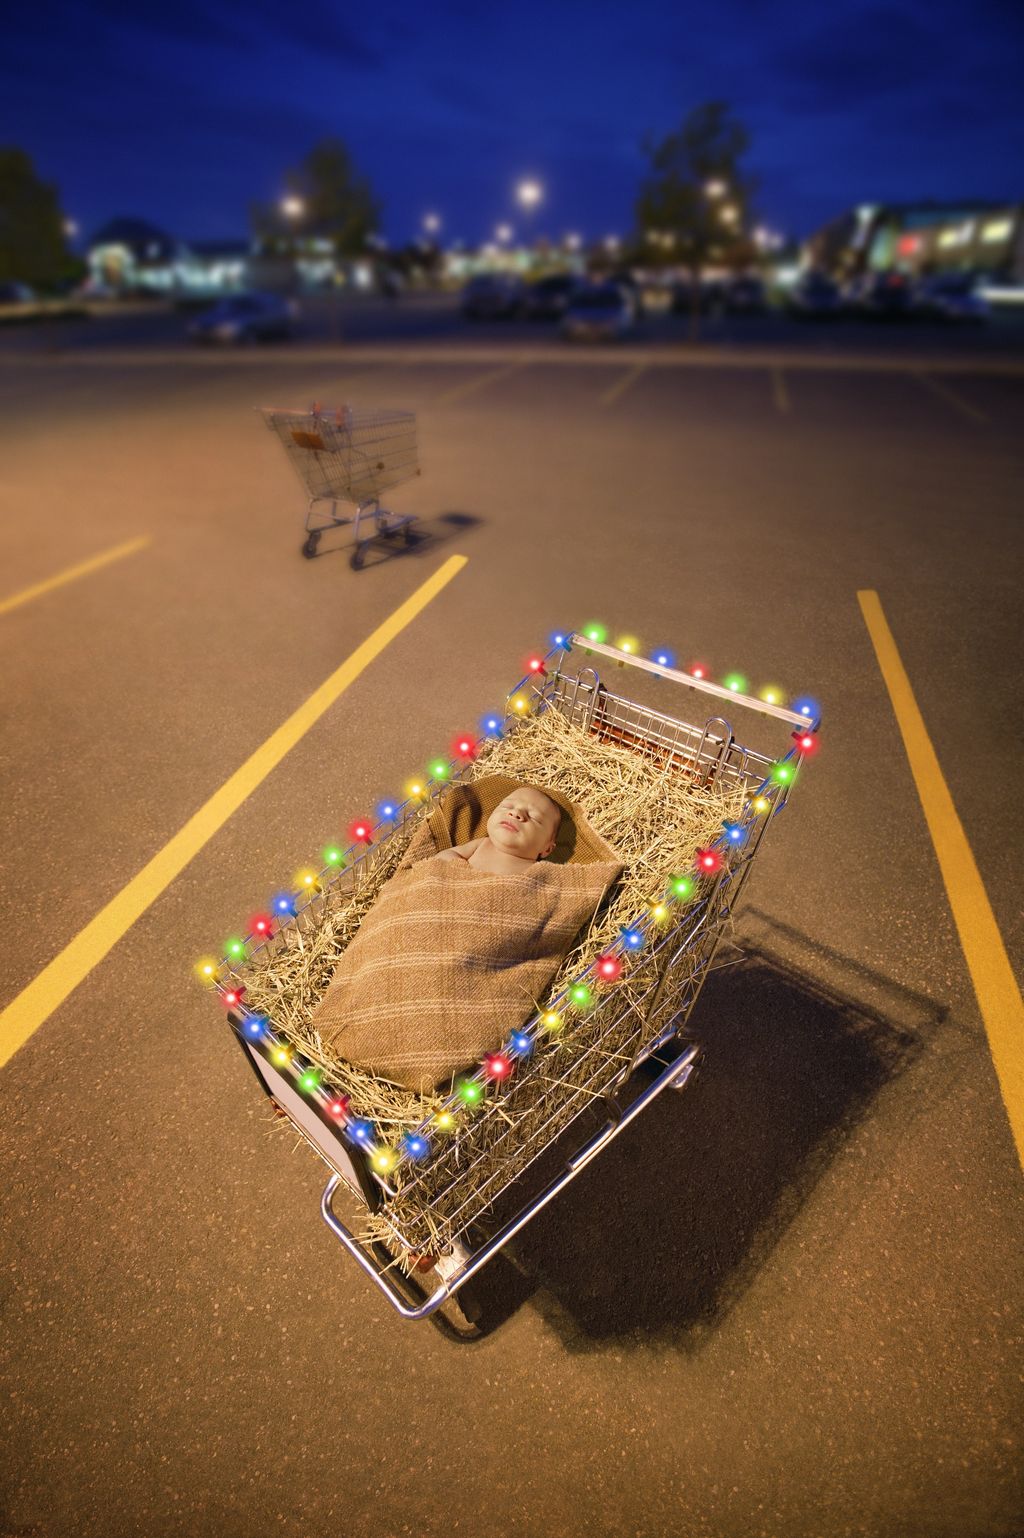 Parking lot with Baby Jesus in shopping cart